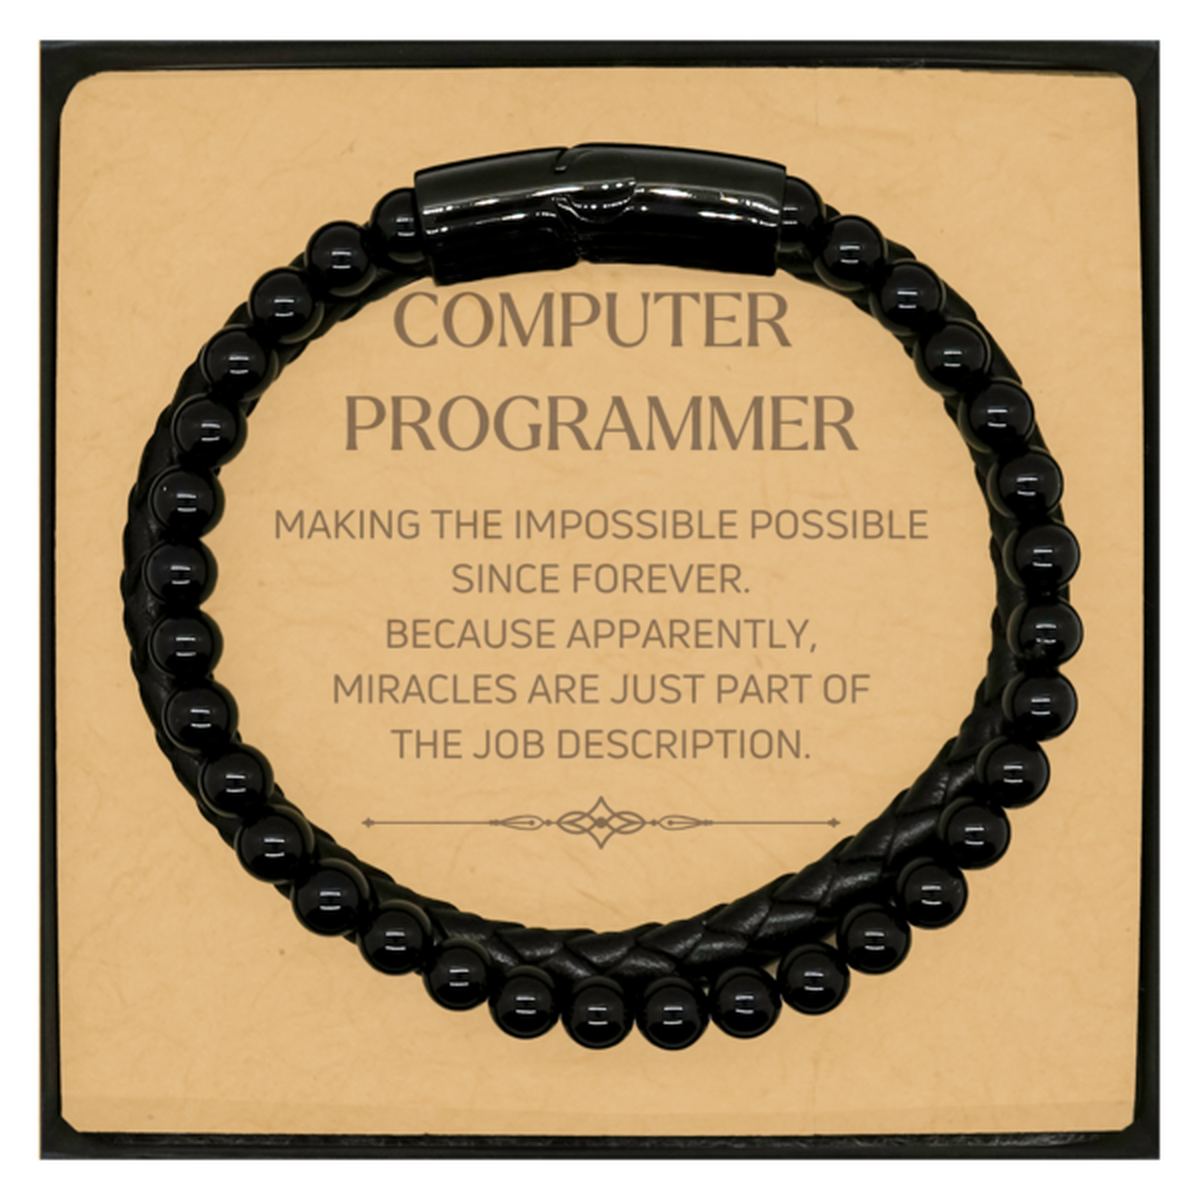 Funny Computer Programmer Gifts, Miracles are just part of the job description, Inspirational Birthday Christmas Stone Leather Bracelets For Computer Programmer, Men, Women, Coworkers, Friends, Boss